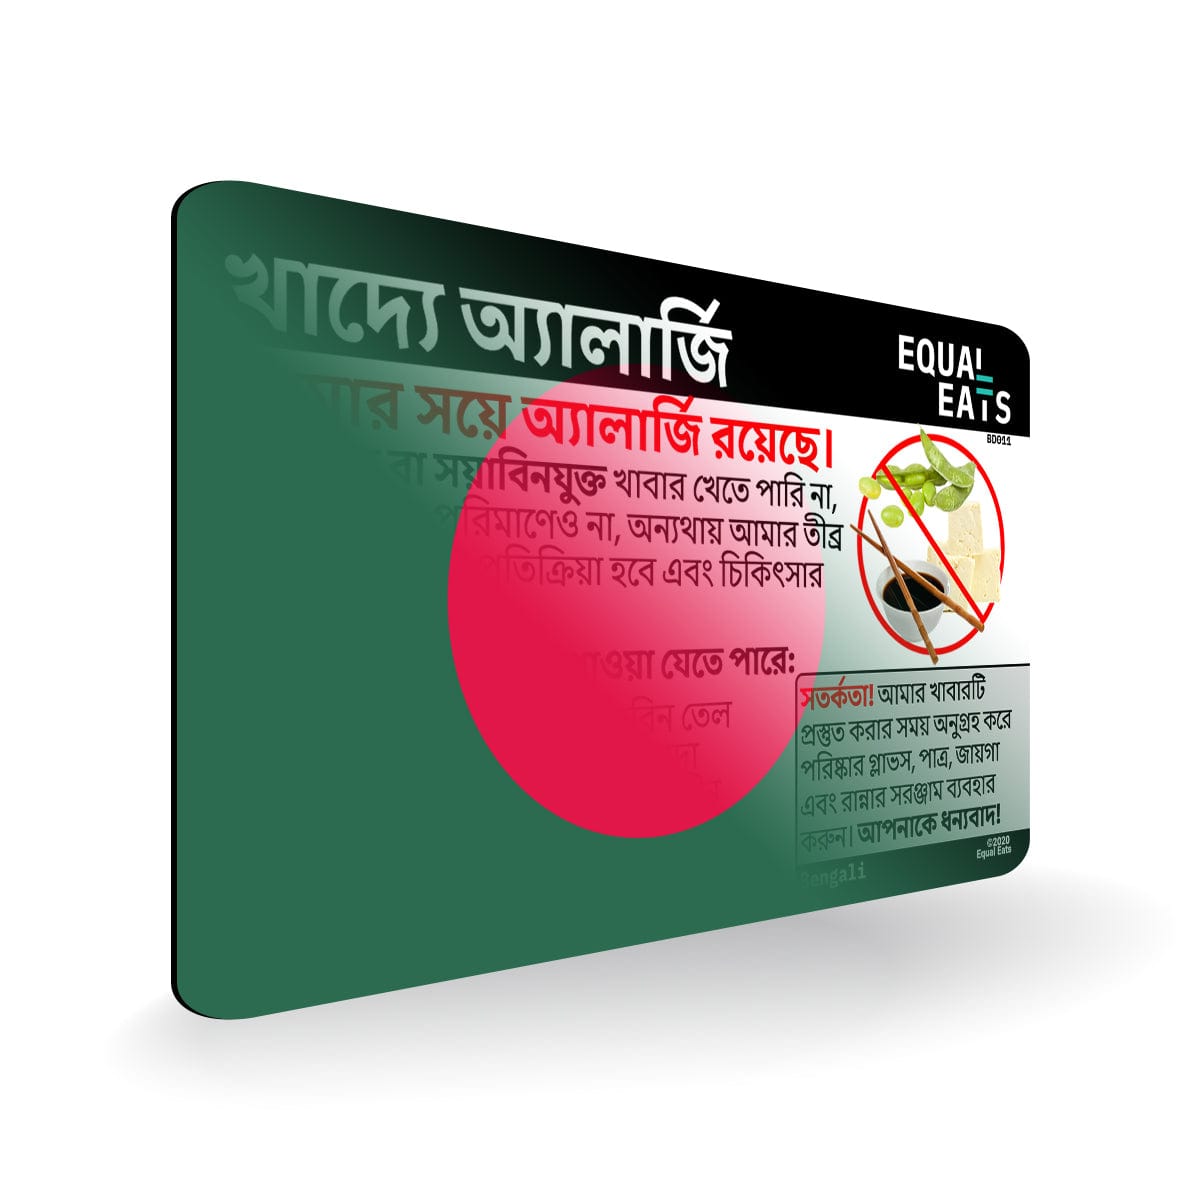 Soy Allergy in Bengali. Soy Allergy Card for Bangladesh